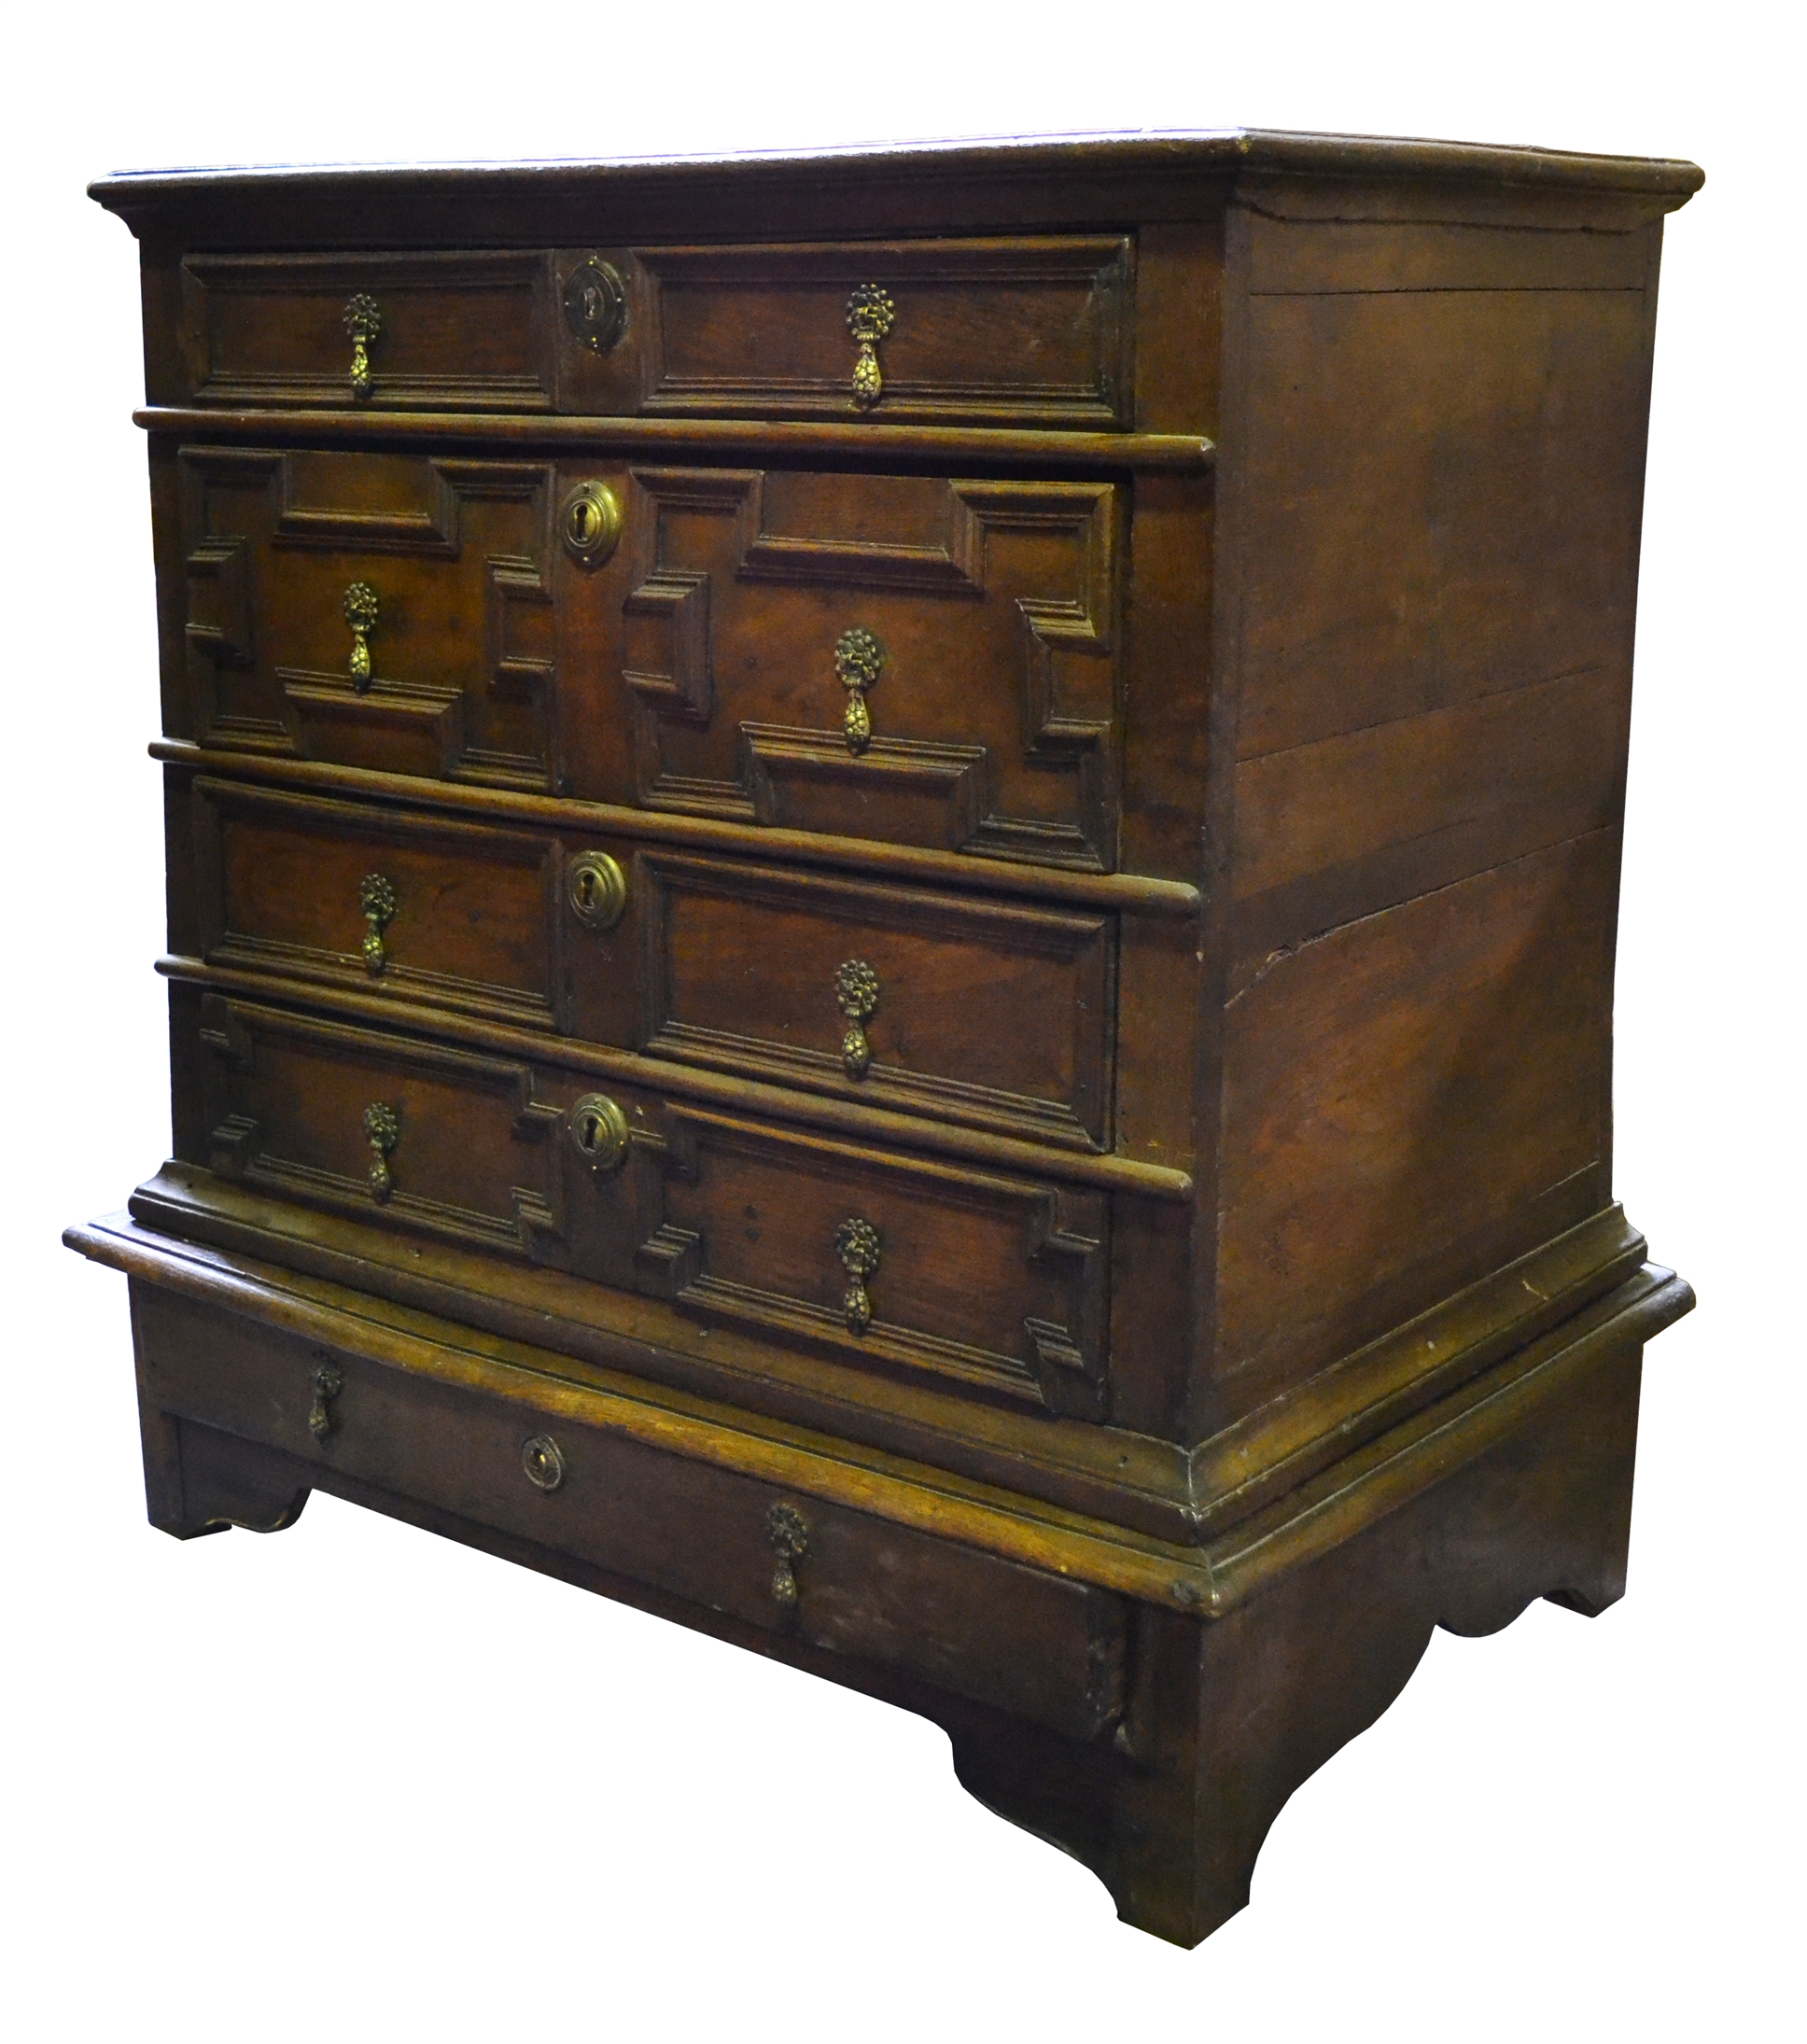 mb/3067 - Early Oak Chest on Stand